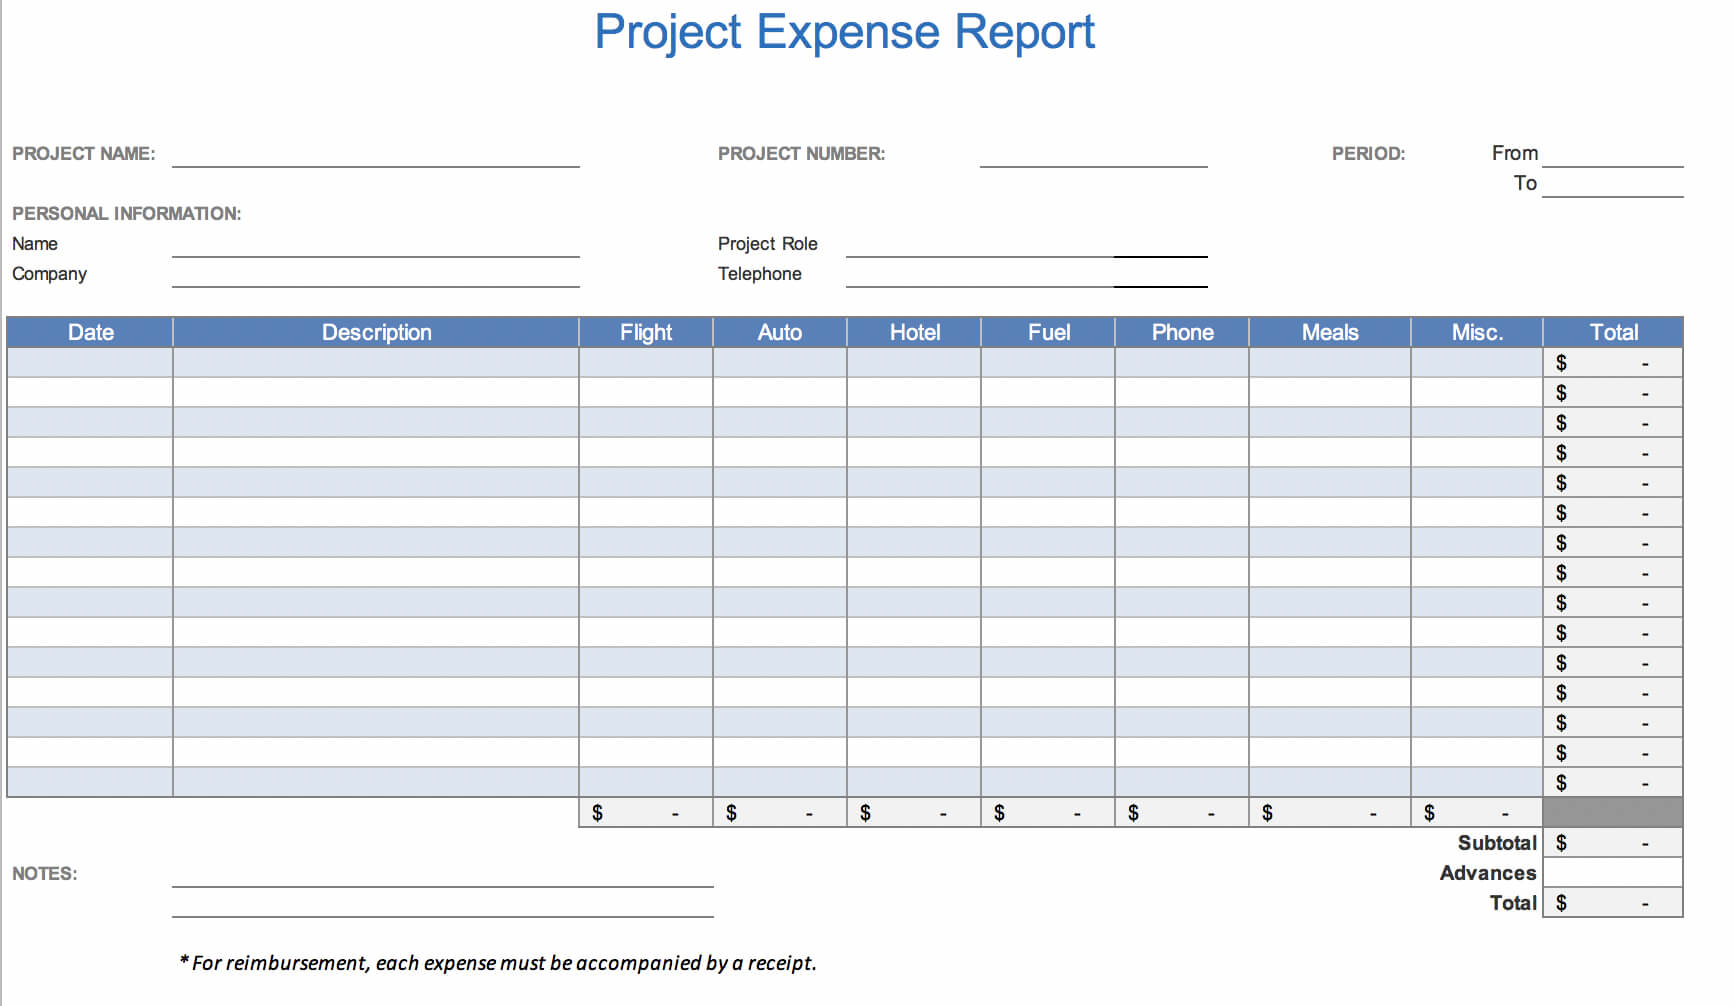 Expense Report Template Excel Free - Tunu.redmini.co With Regard To Expense Report Spreadsheet Template Excel